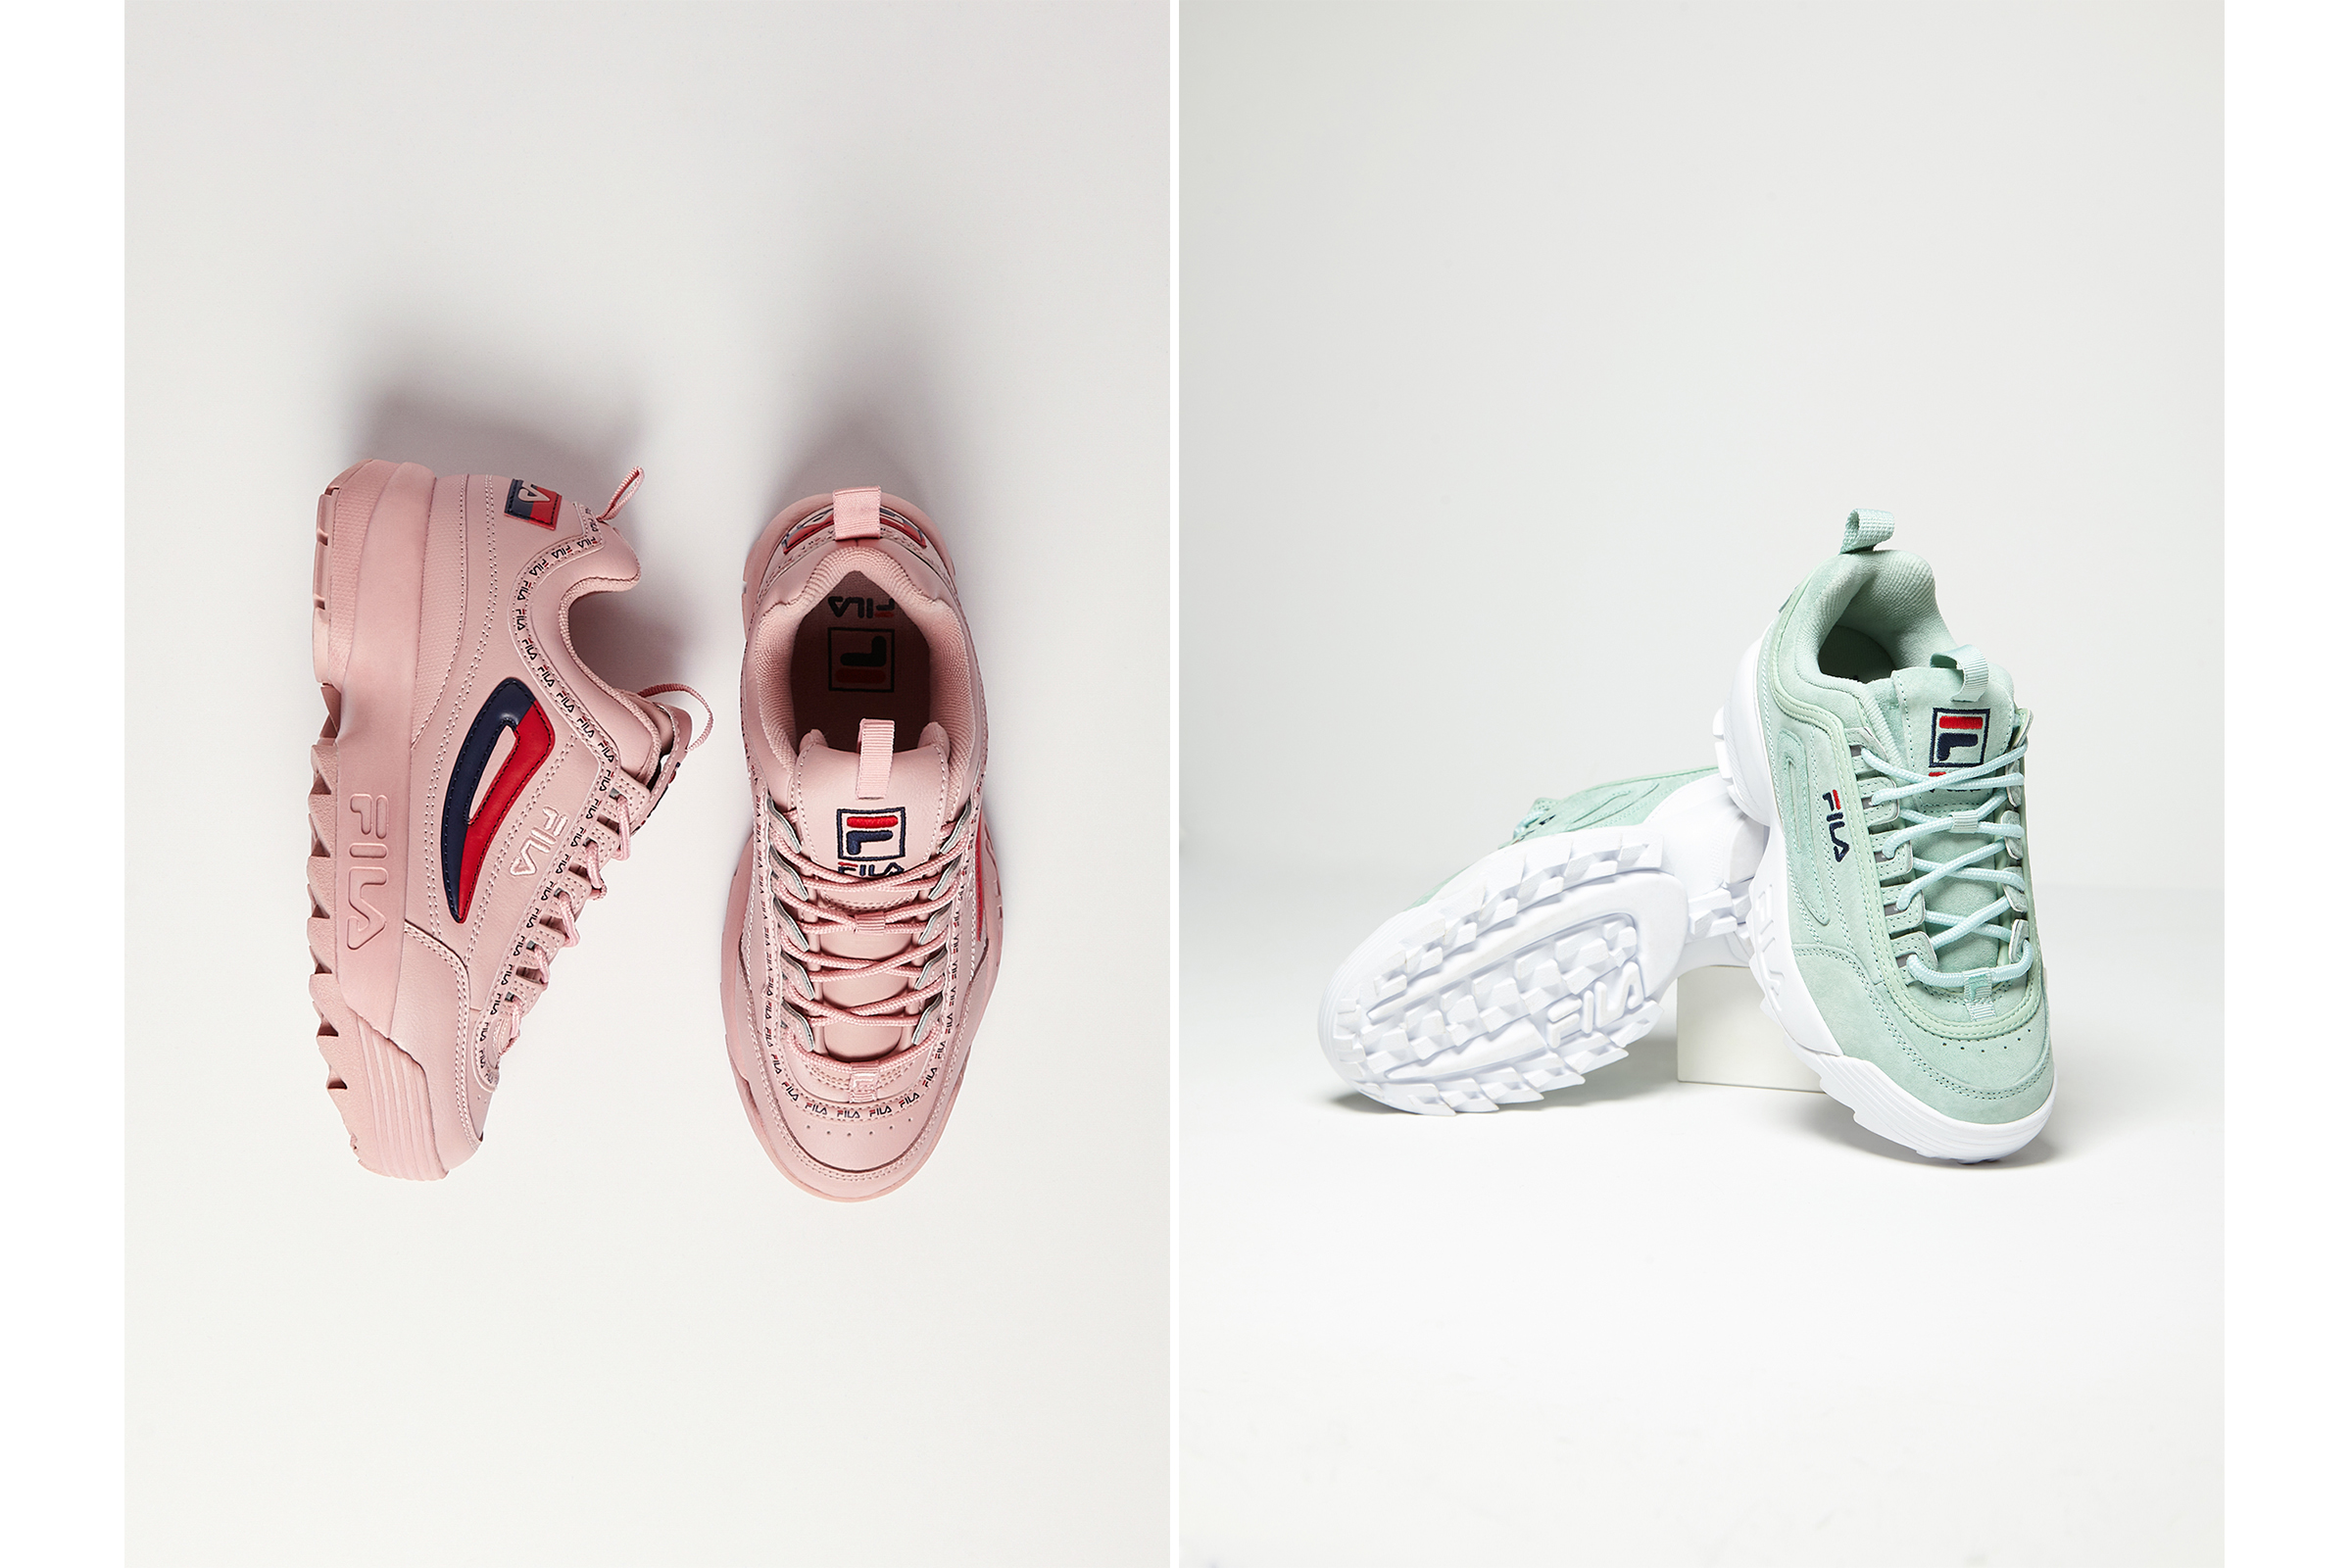 puma or fila which is better